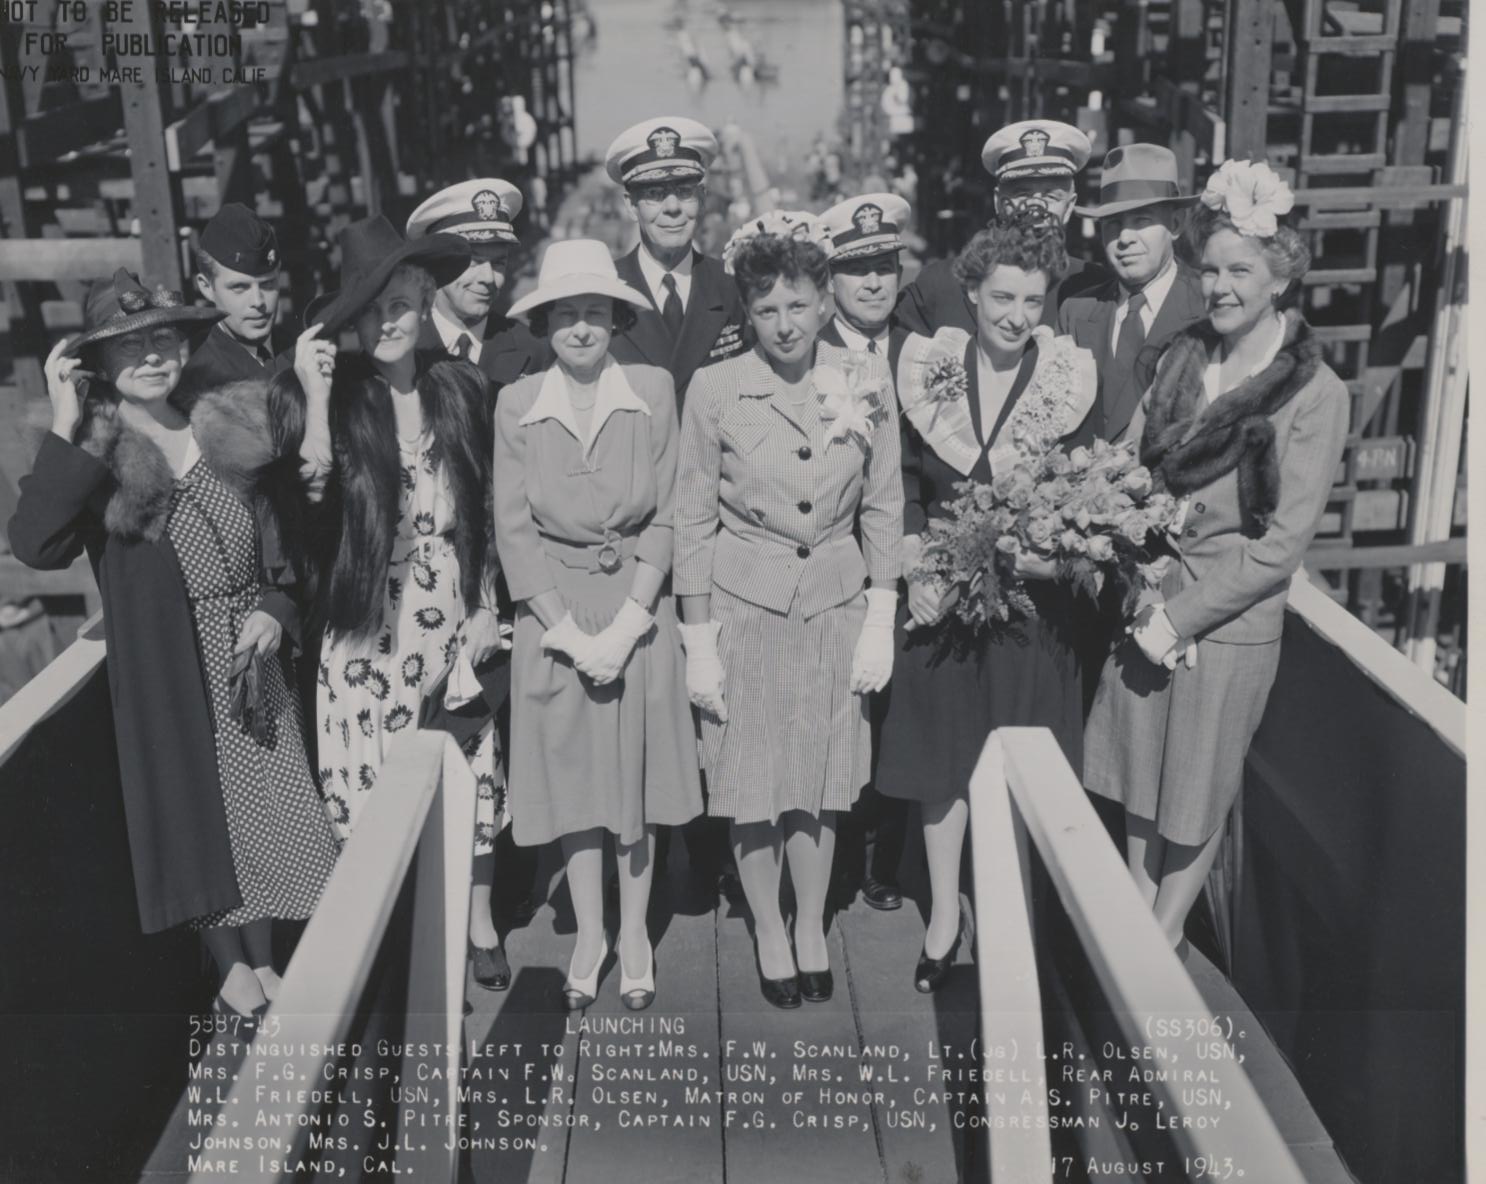 Launching party of Tang, Mare Island Navy Yard, Vallejo, California, United States, 17 Aug 1943